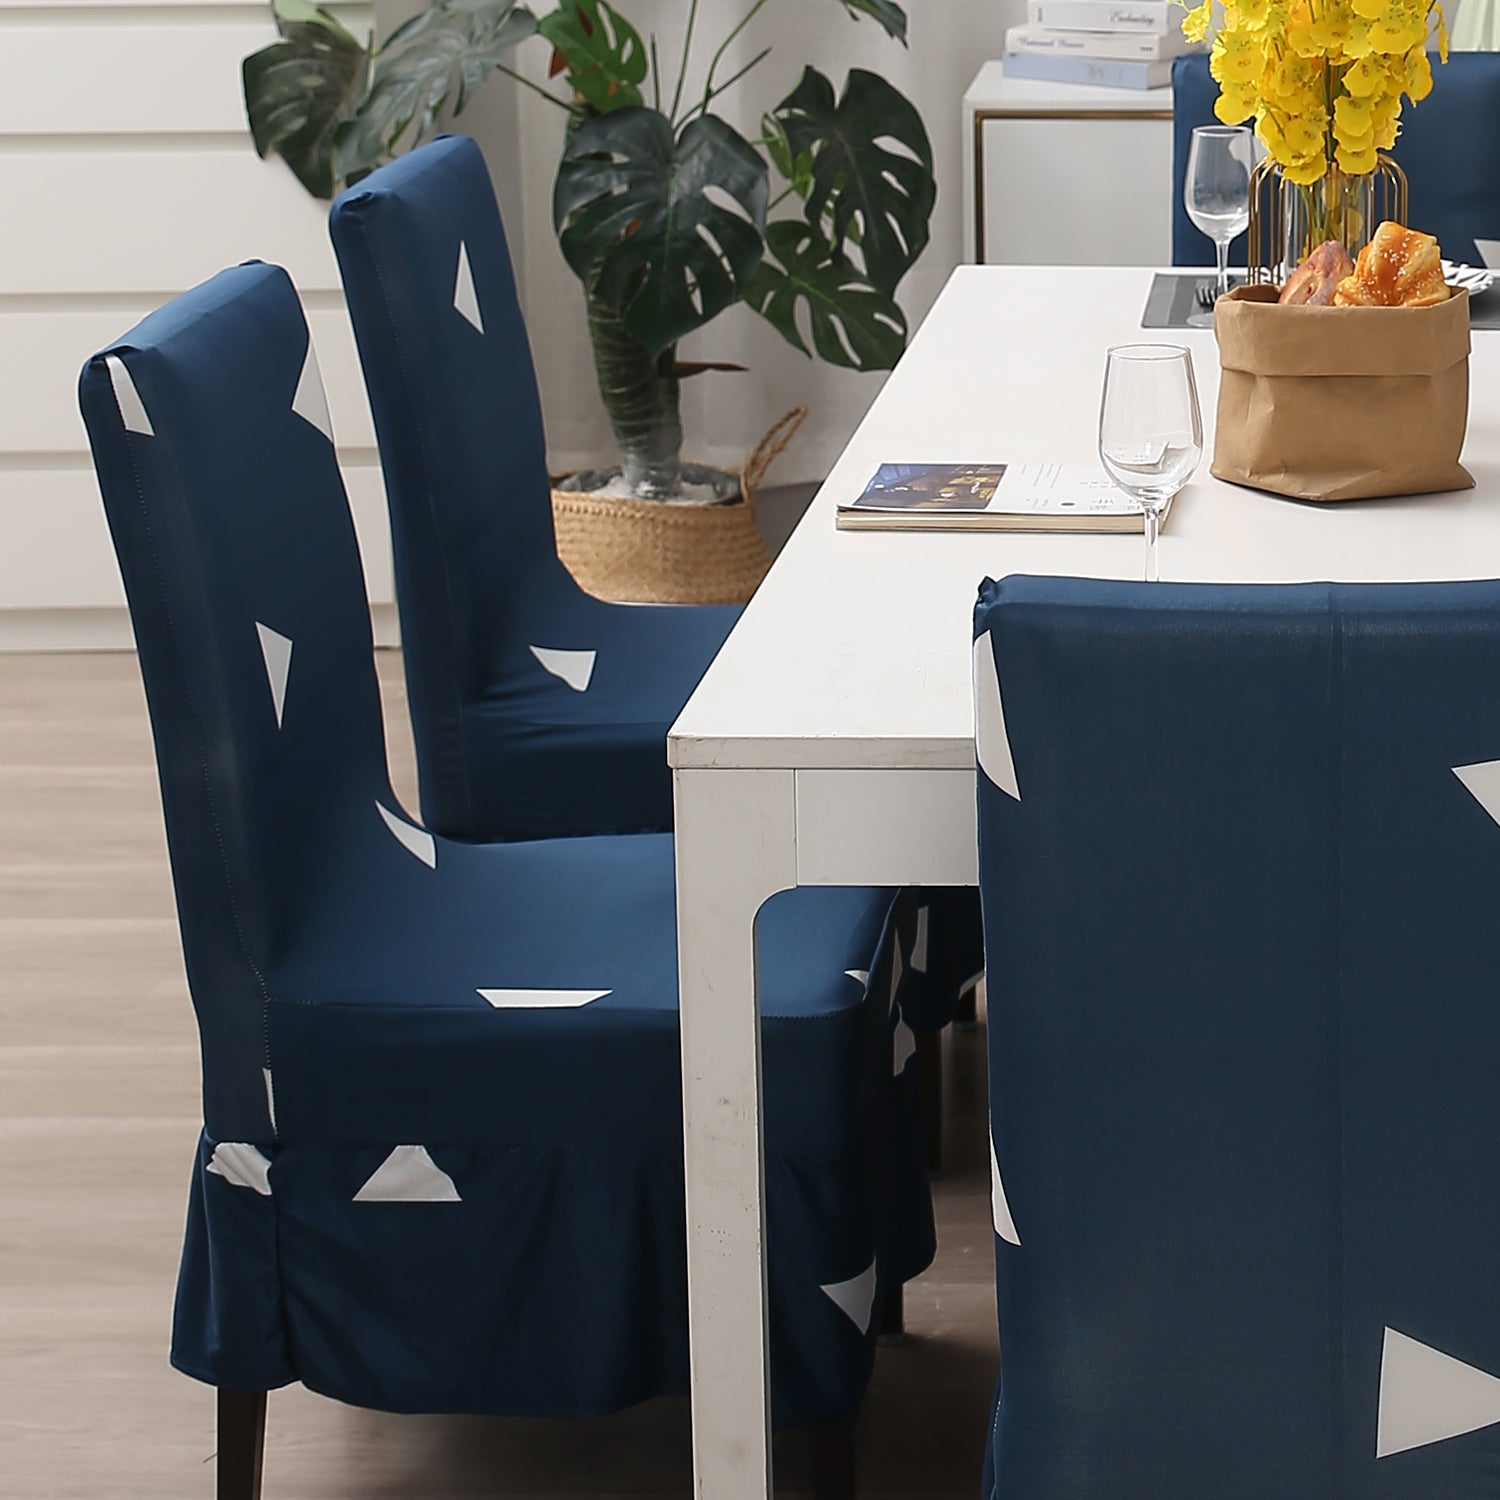 Elastic Stretchable Dining Chair Cover with Frill, Blue Triangle